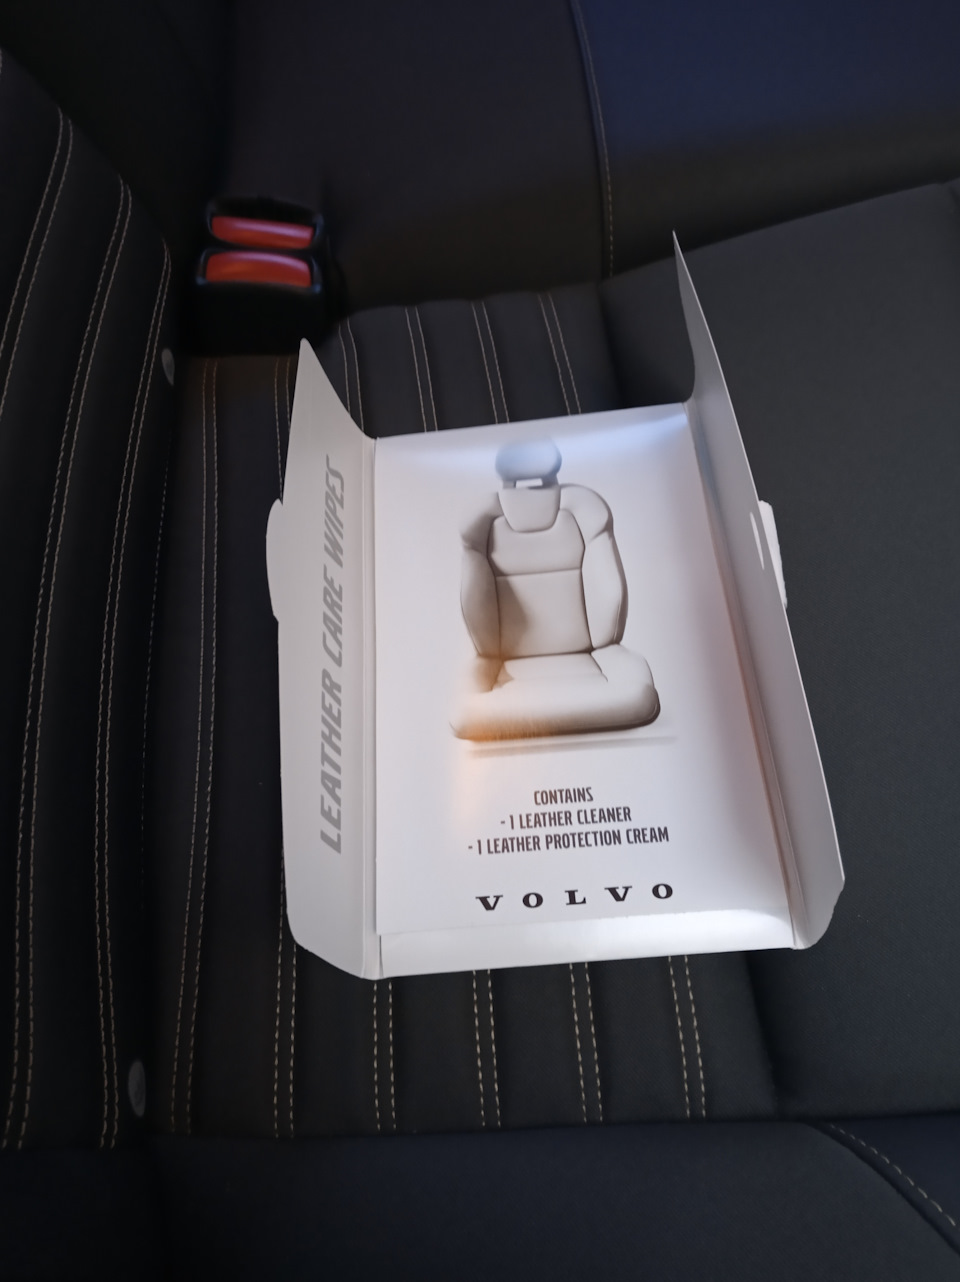 Volvo Leather Cleaning Wipes 31393558 Genuine Volvo 31393558